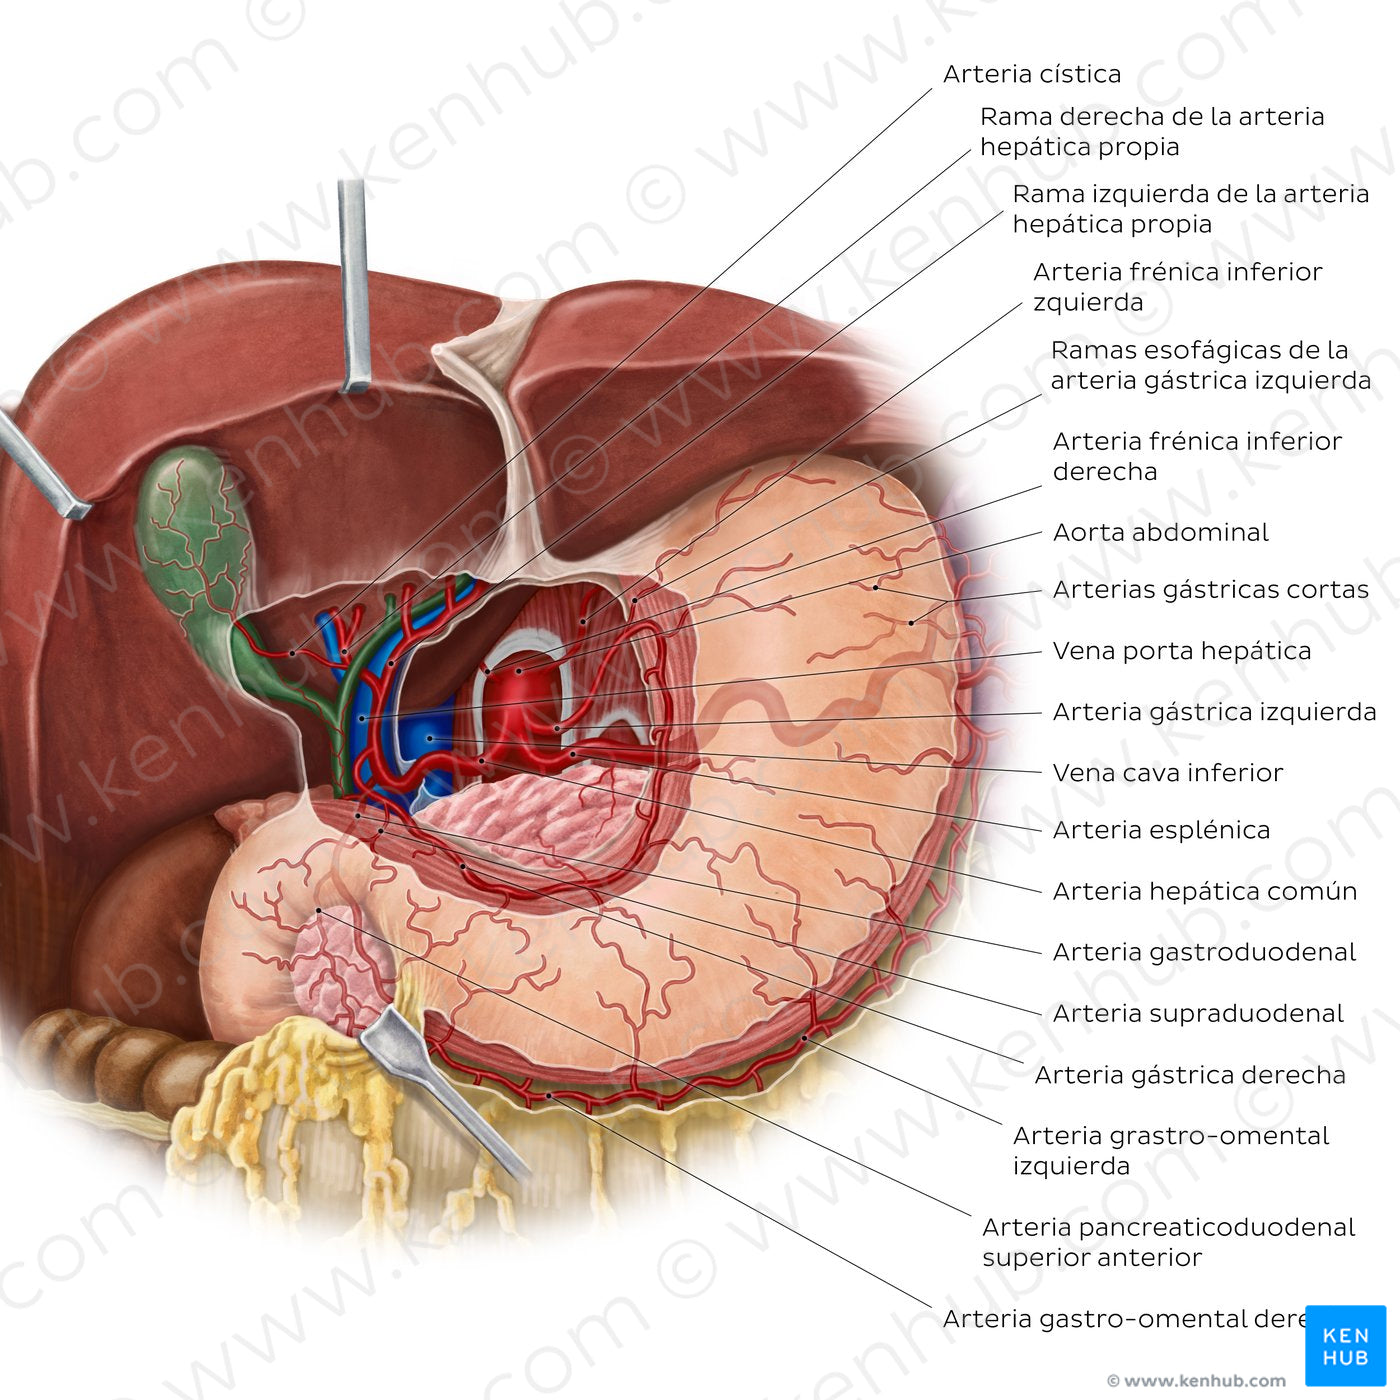 Arteries of the stomach, liver and spleen (Spanish)